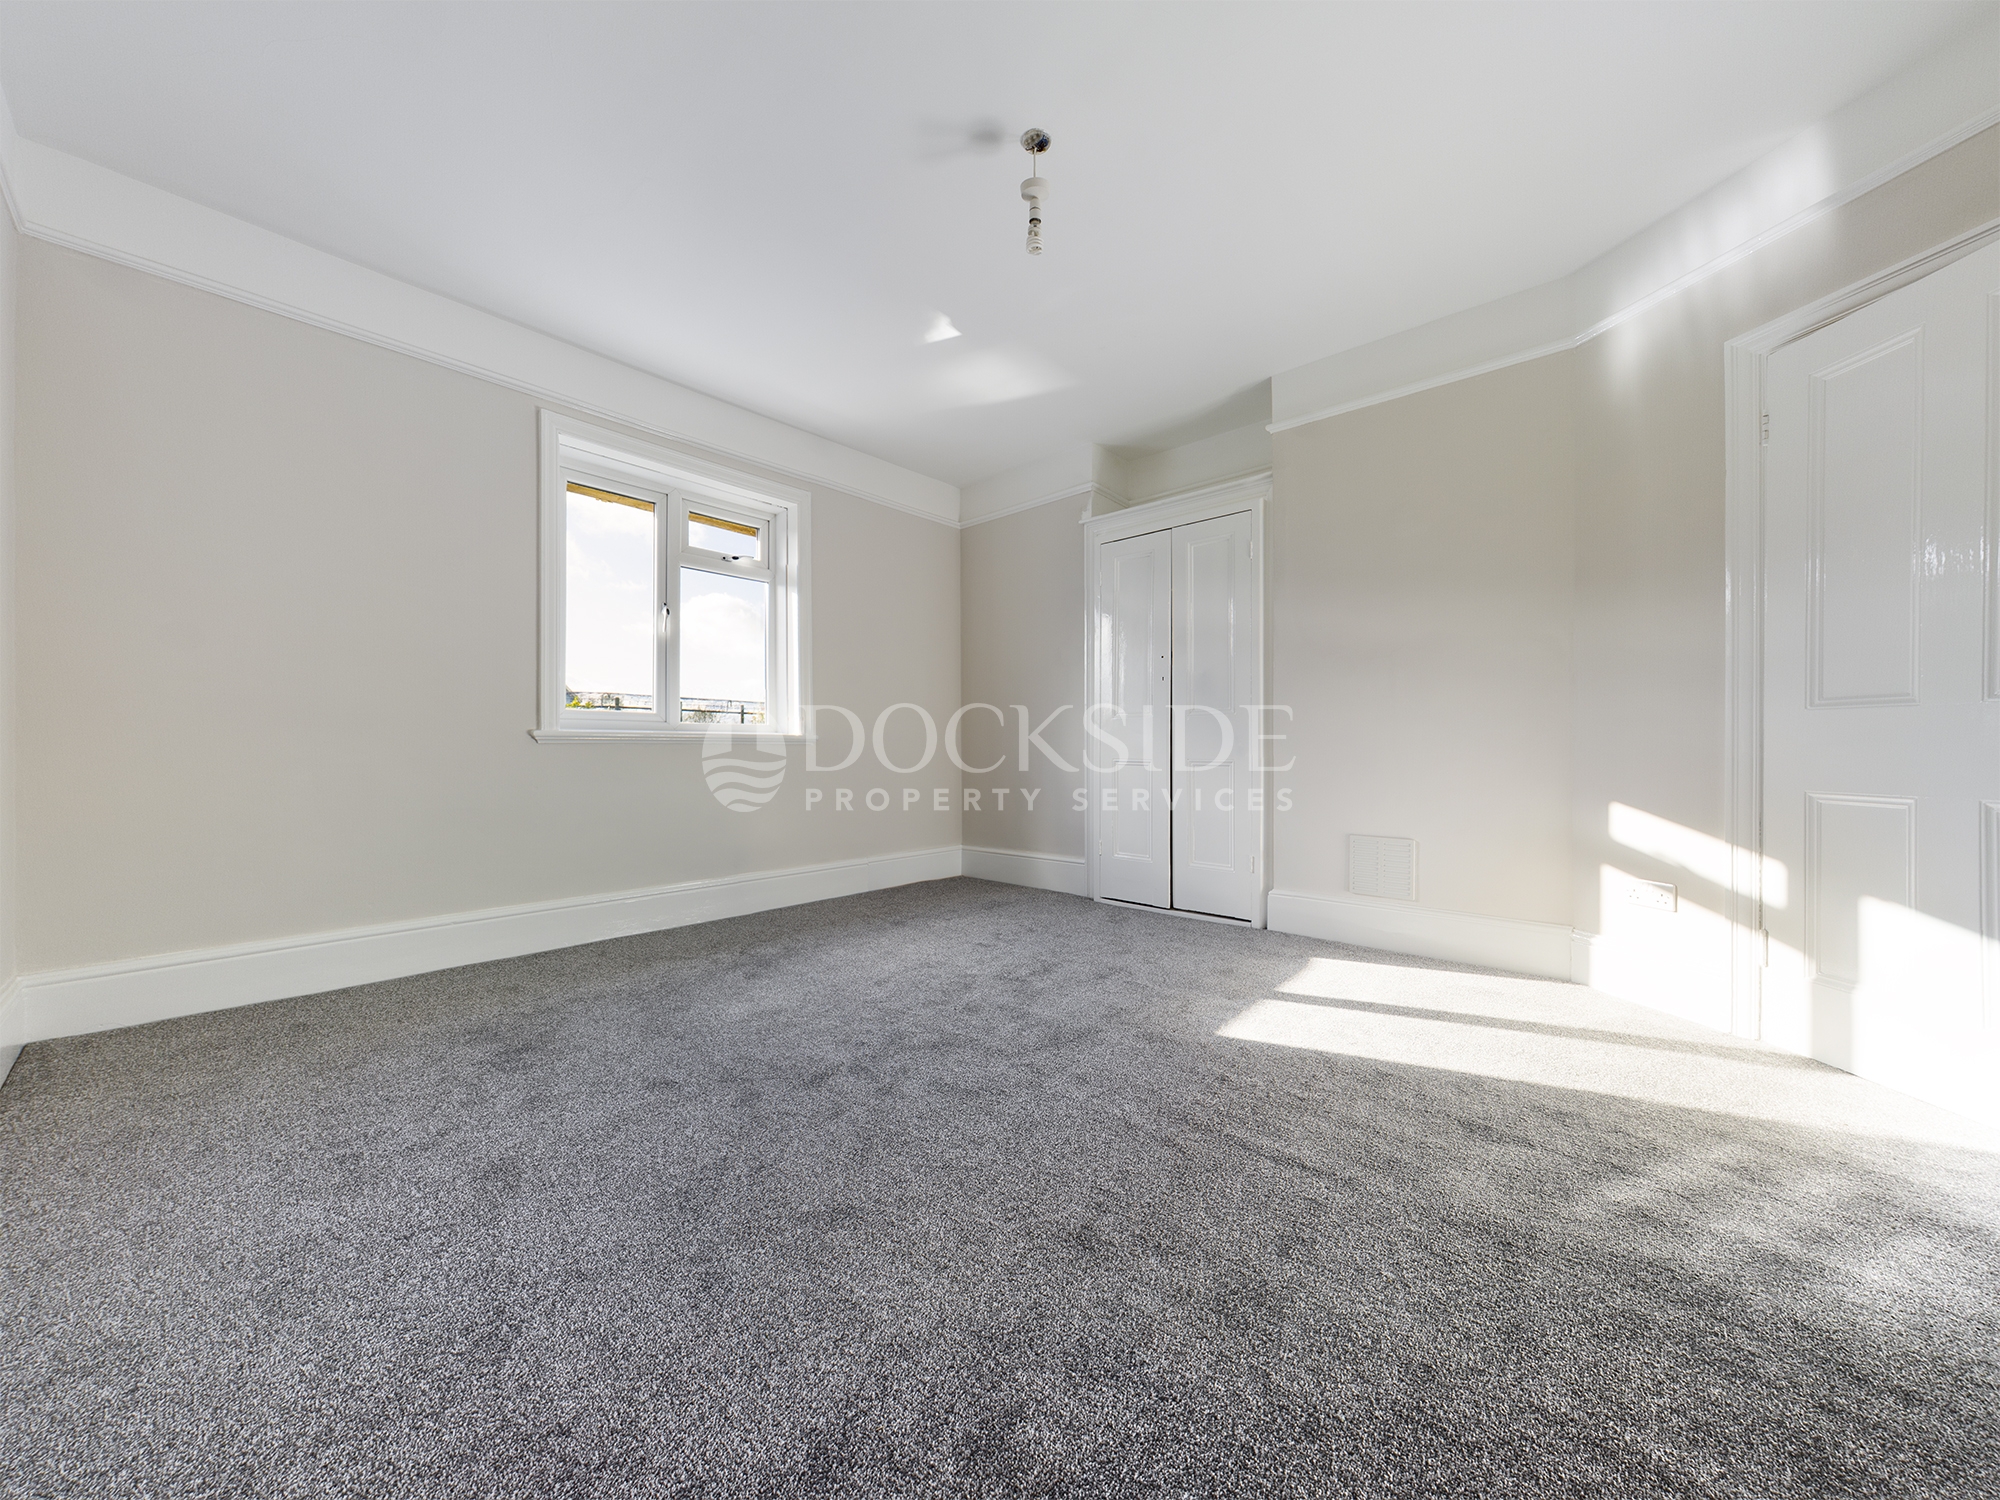 3 bed house to rent in Sir Evelyn Road, Rochester - Property Image 1